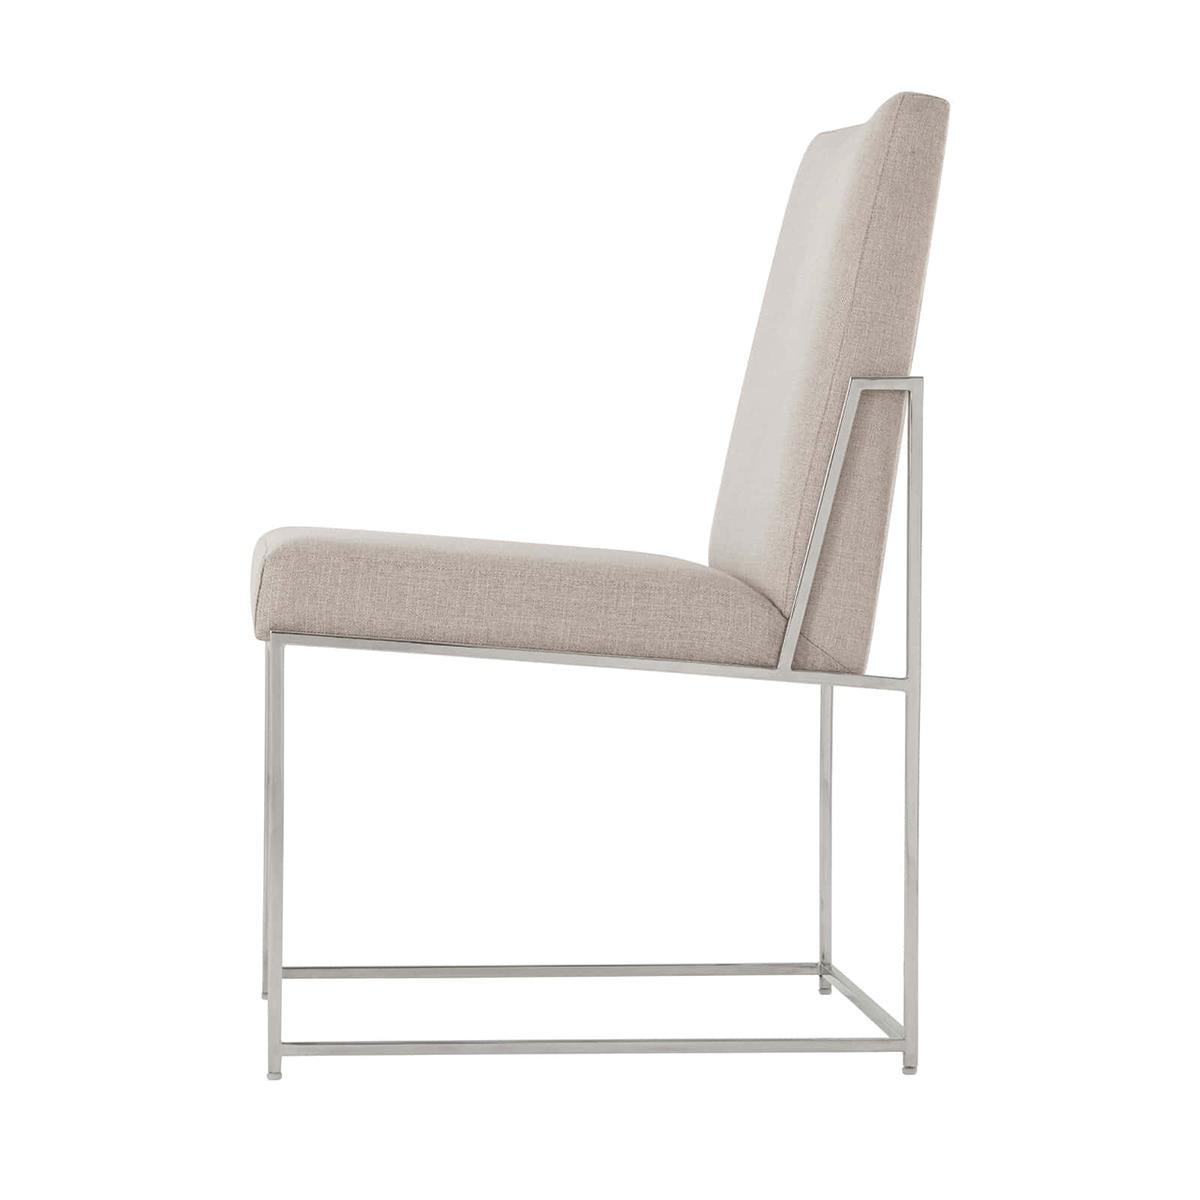 Mid century steel frame dining chair with a nickel finish steel frame, boxed upholstered back and seat, with angular polished nickel finish legs, joined by stretchers.

Dimensions: 22.5